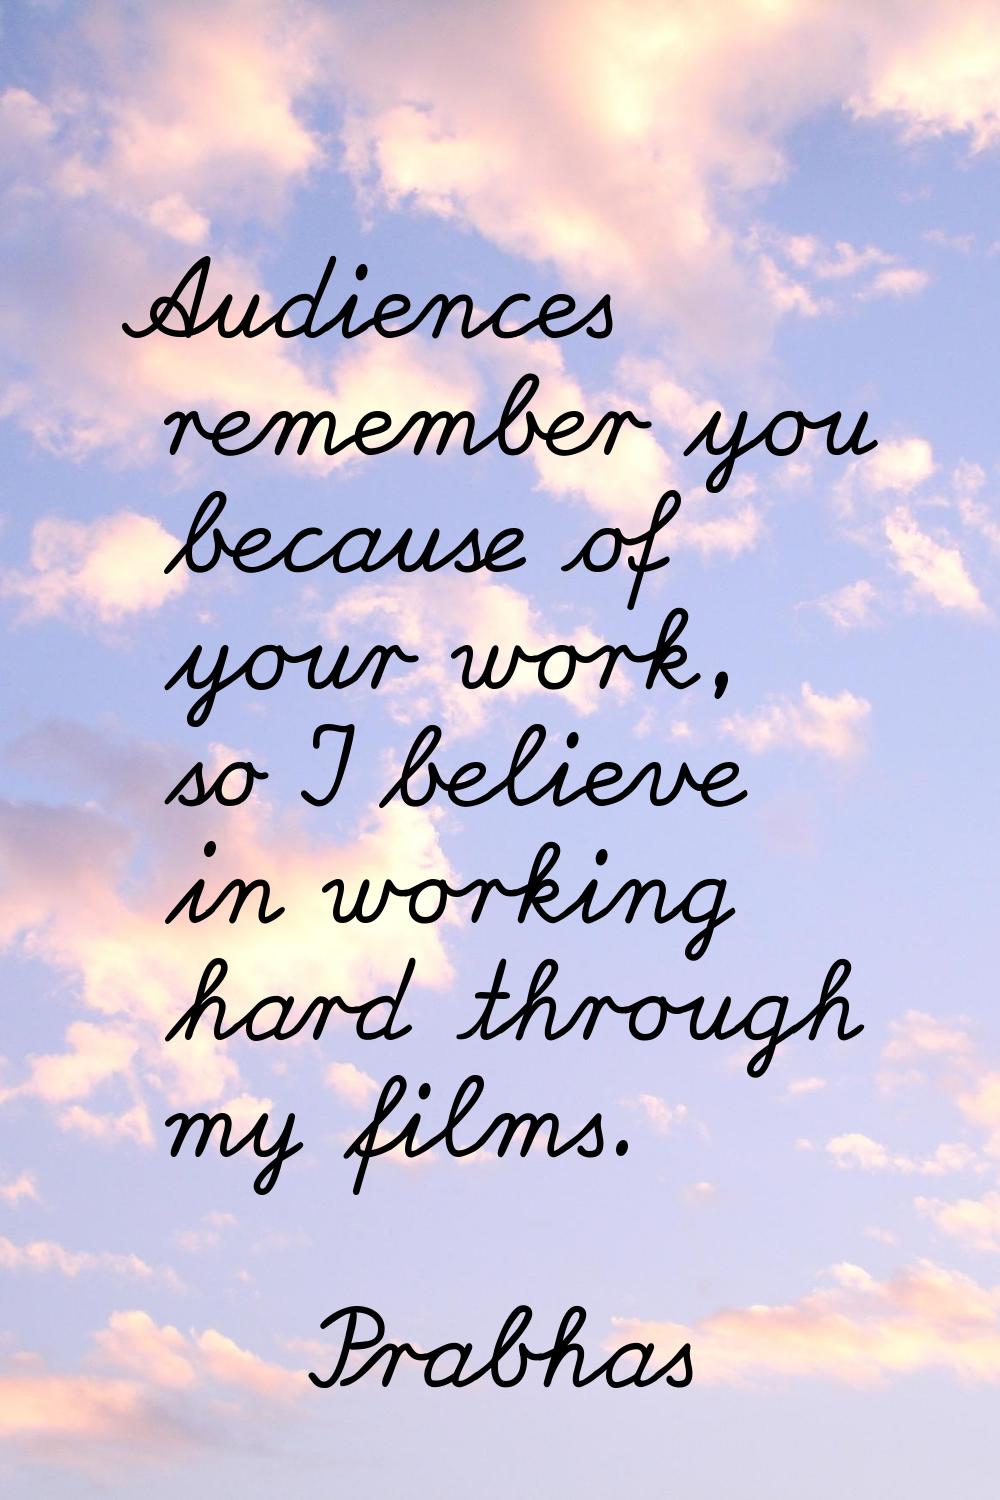 Audiences remember you because of your work, so I believe in working hard through my films.